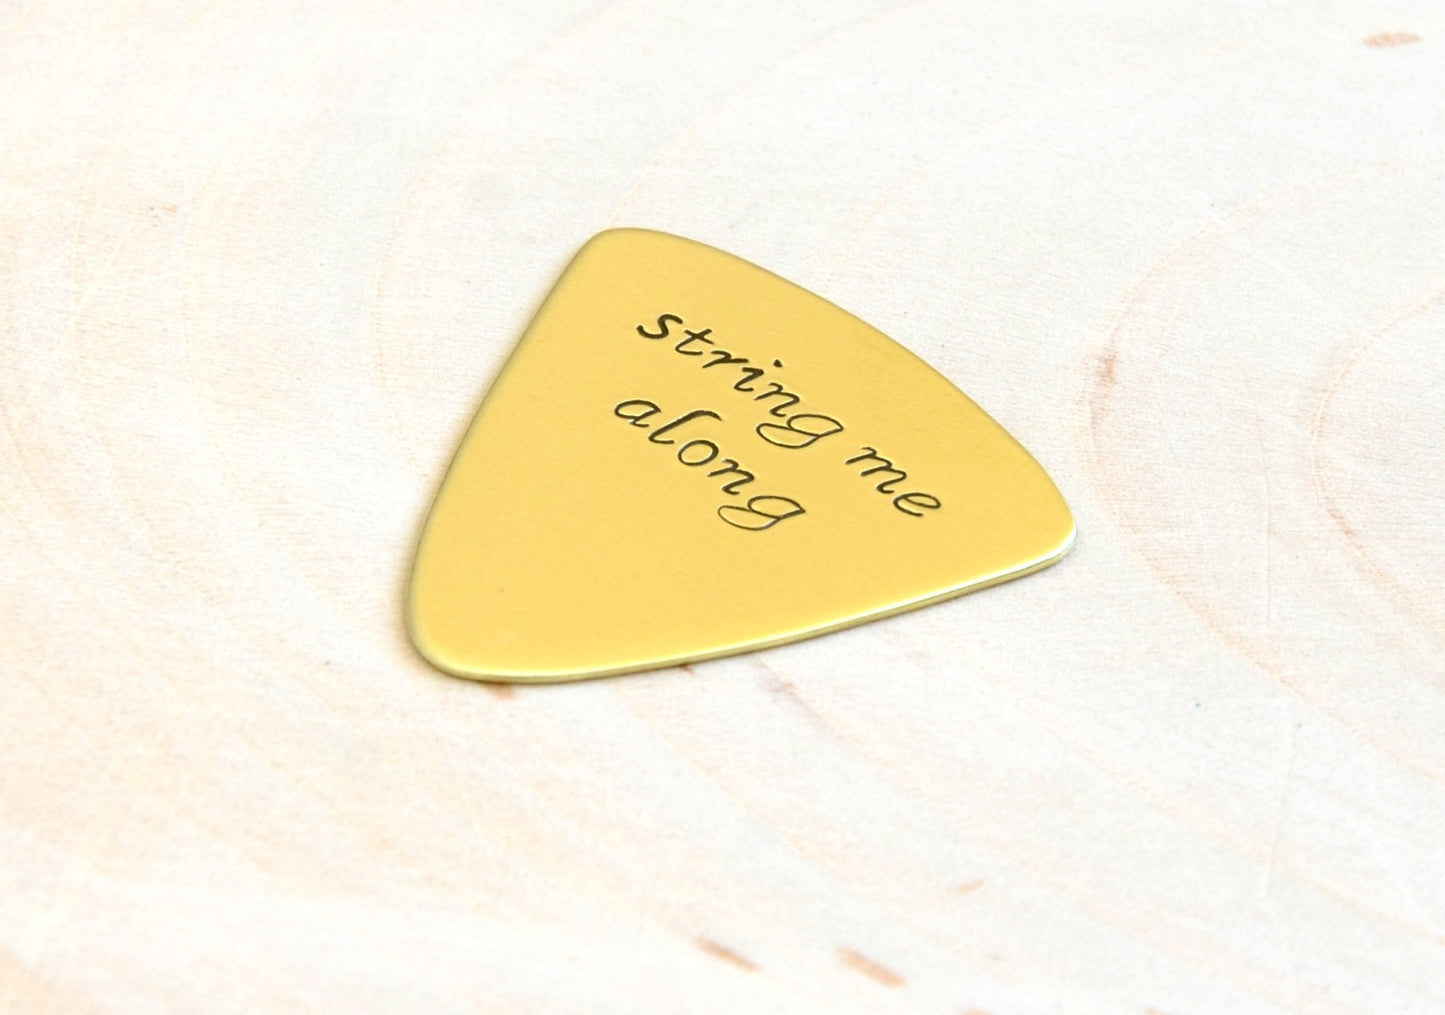 String me Along Triangular Style Guitar Pick in Brass